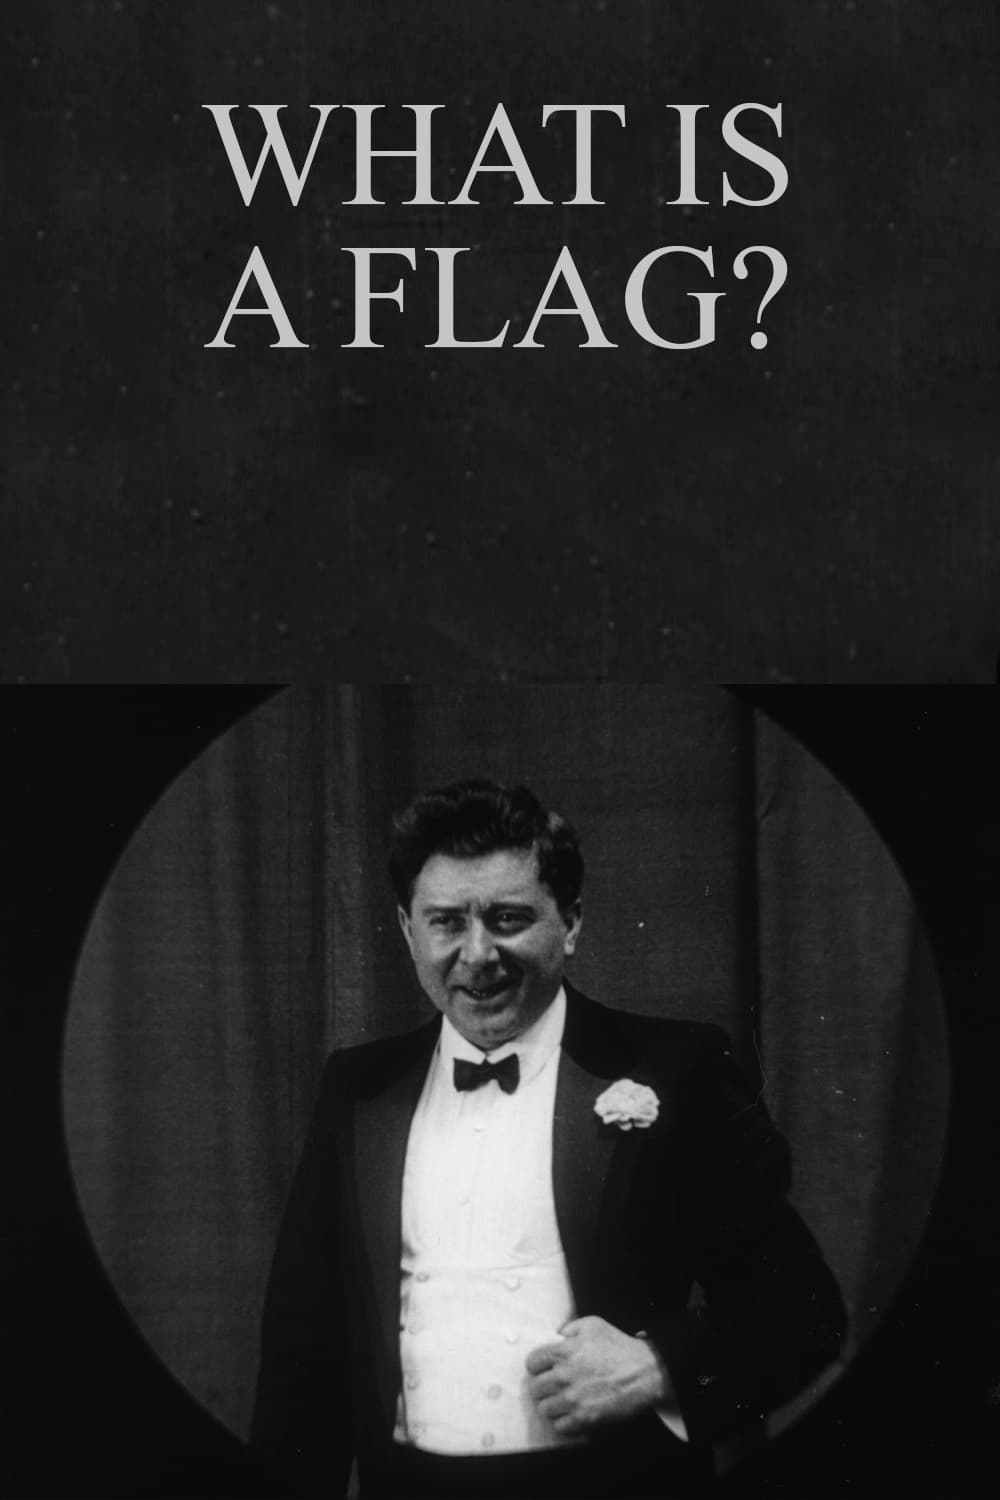 What is a flag?